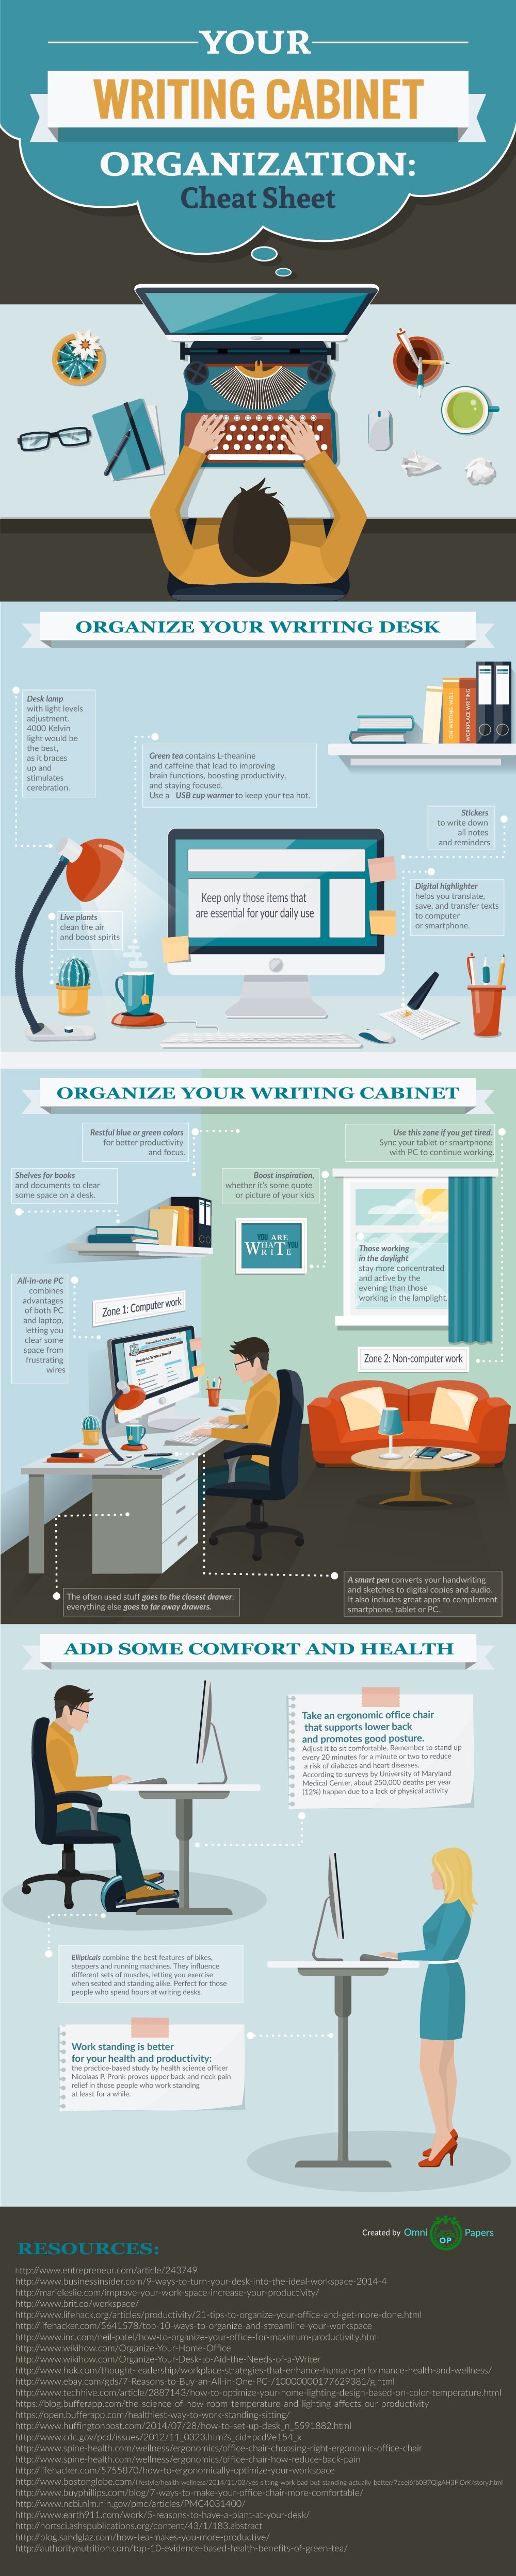 your writing cabinet organization (1)